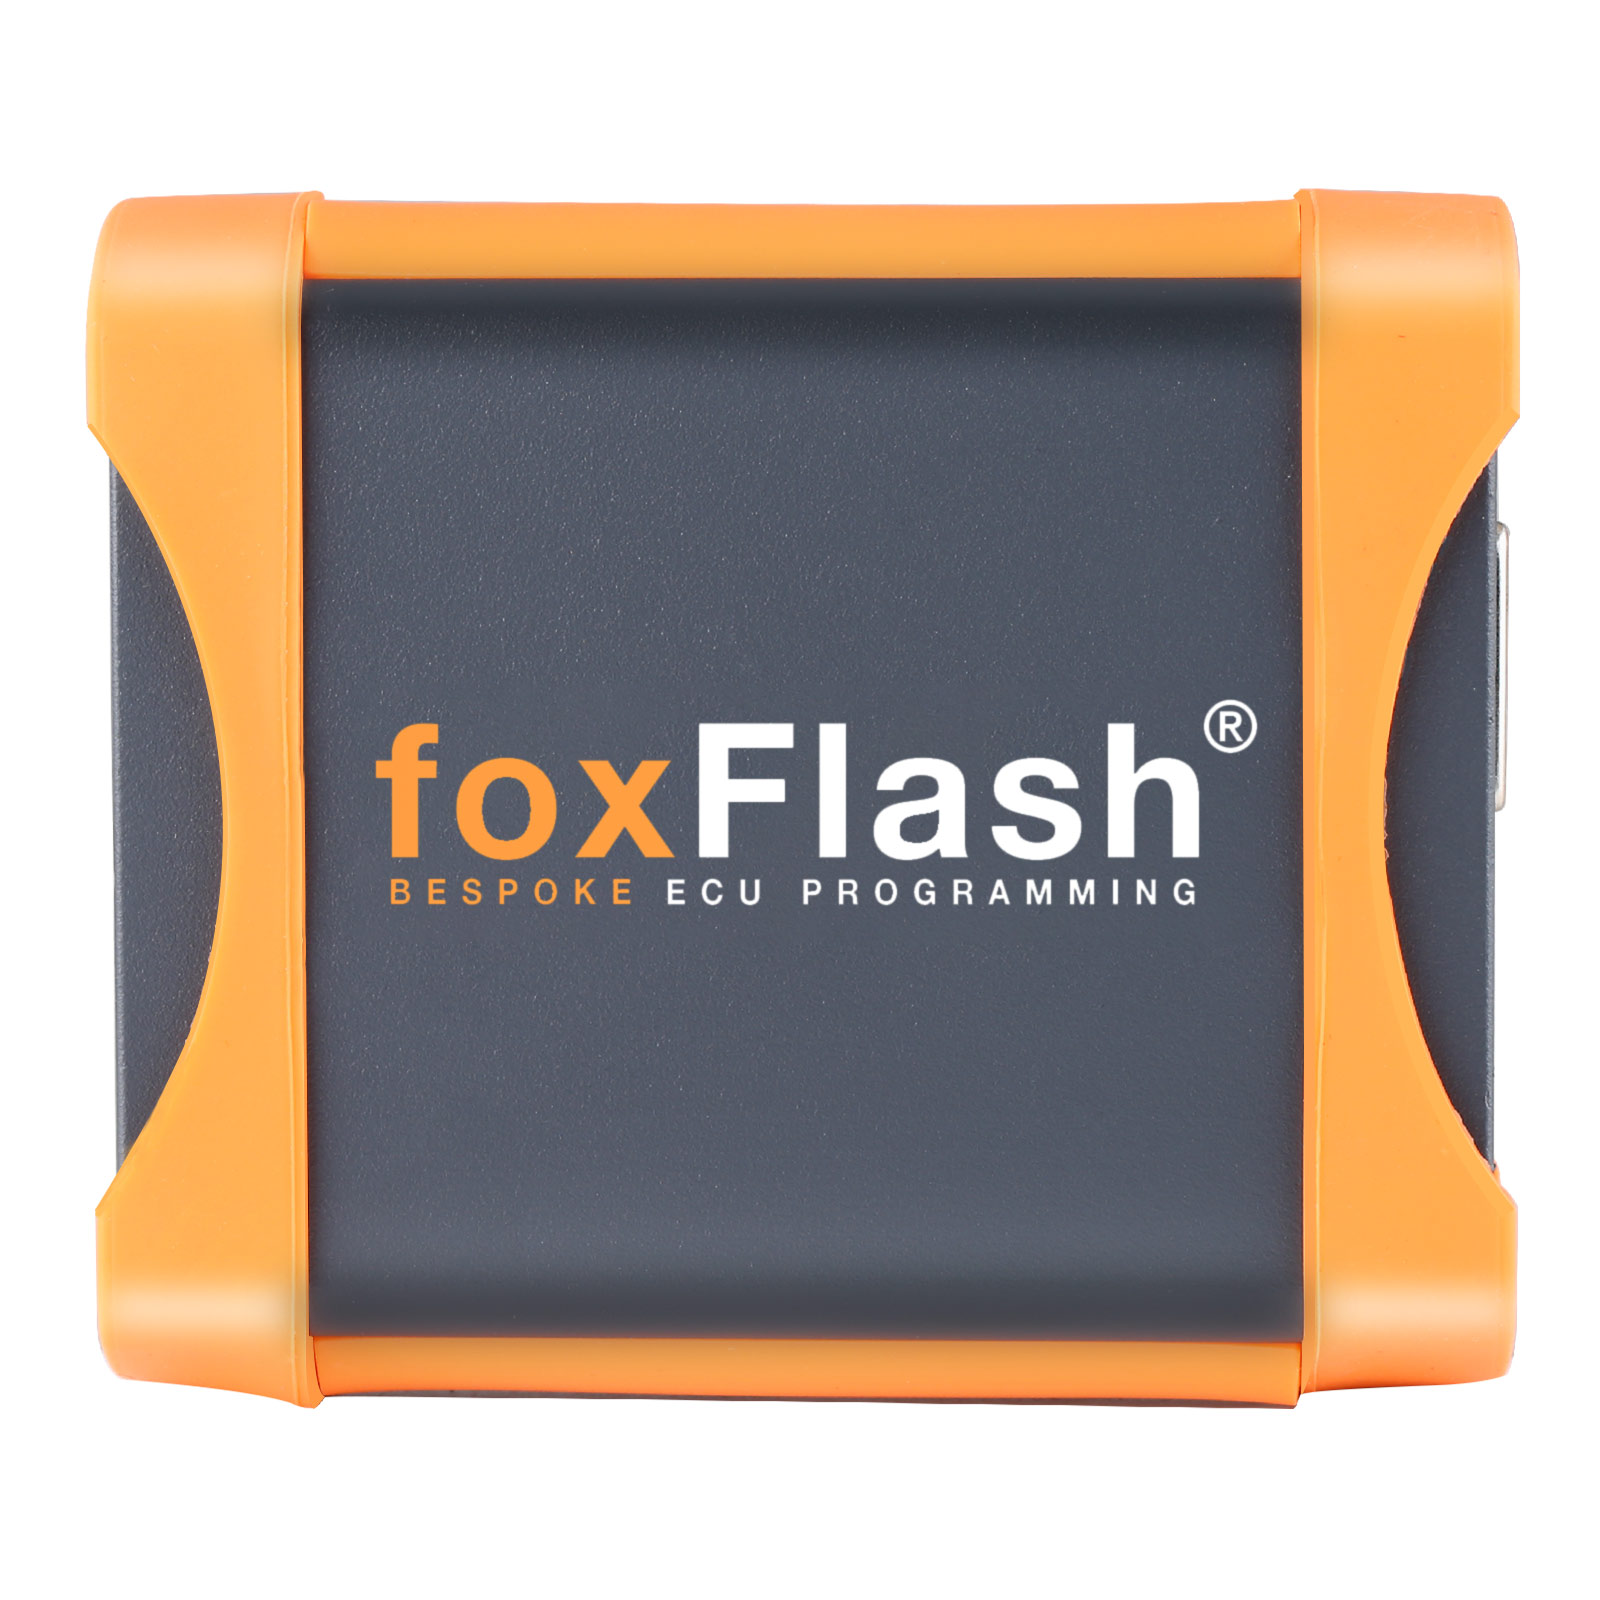 FoxFlash Chiptuning Tool Free Update with Free Damos Supports VR Reading and Auto Checksum and Super Strong ECU, TCU Clo